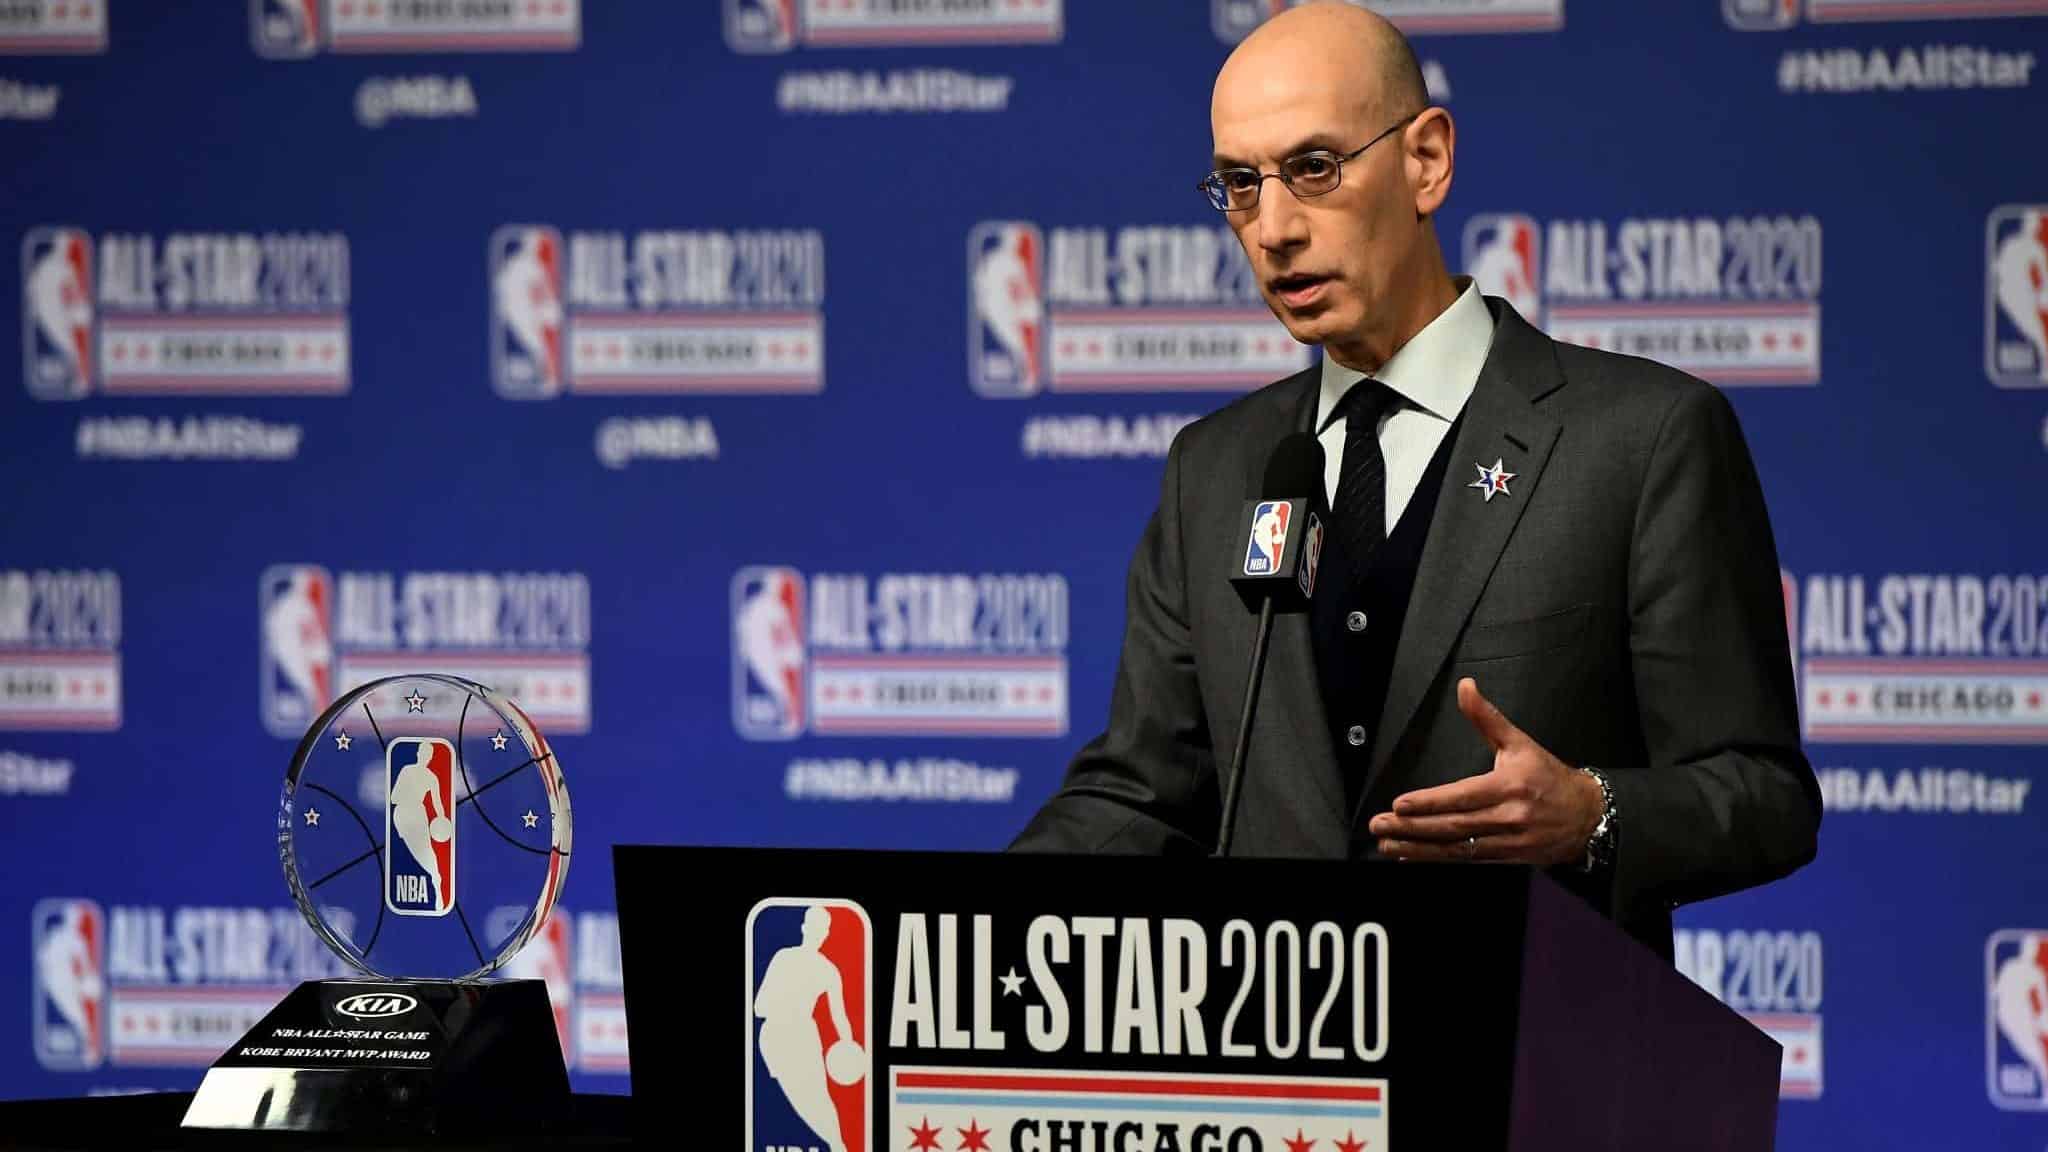 CHICAGO, ILLINOIS - FEBRUARY 15: NBA Commissioner Adam Silver speaks to the media during a press conference at the United Center on February 15, 2020 in Chicago, Illinois. NOTE TO USER: User expressly acknowledges and agrees that, by downloading and or using this photograph, User is consenting to the terms and conditions of the Getty Images License Agreement.